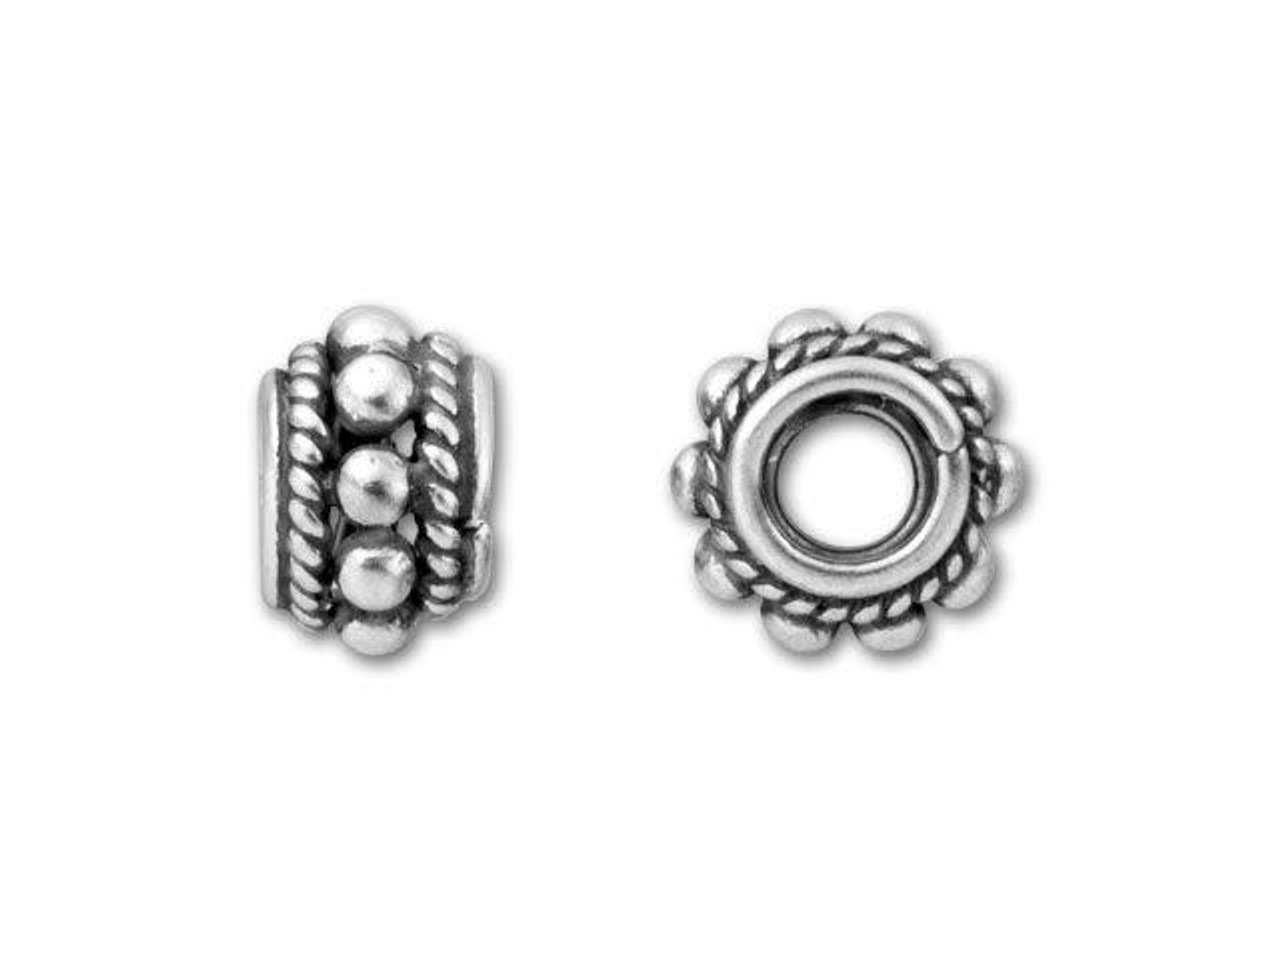 10mm Granulated round Sterling Silver .925 Bali Beads Jewelry